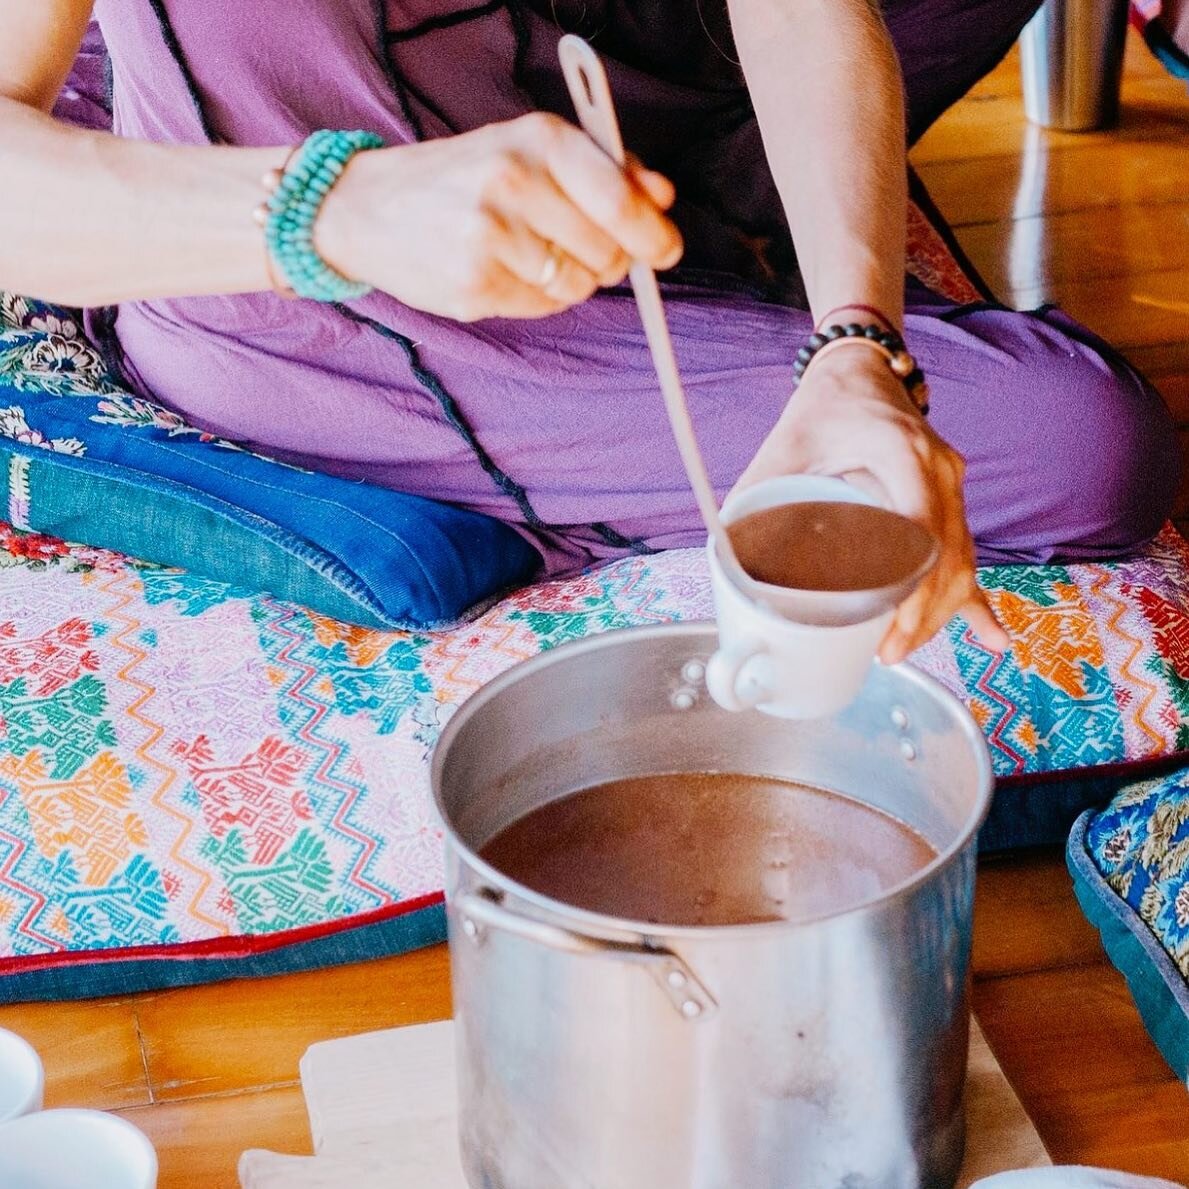 With every cup served around the world, cacao is bringing communities together and opening hearts and bringing joy! Gracias madre cacao! 💓💓💓

Pic by @flowyogaadventures